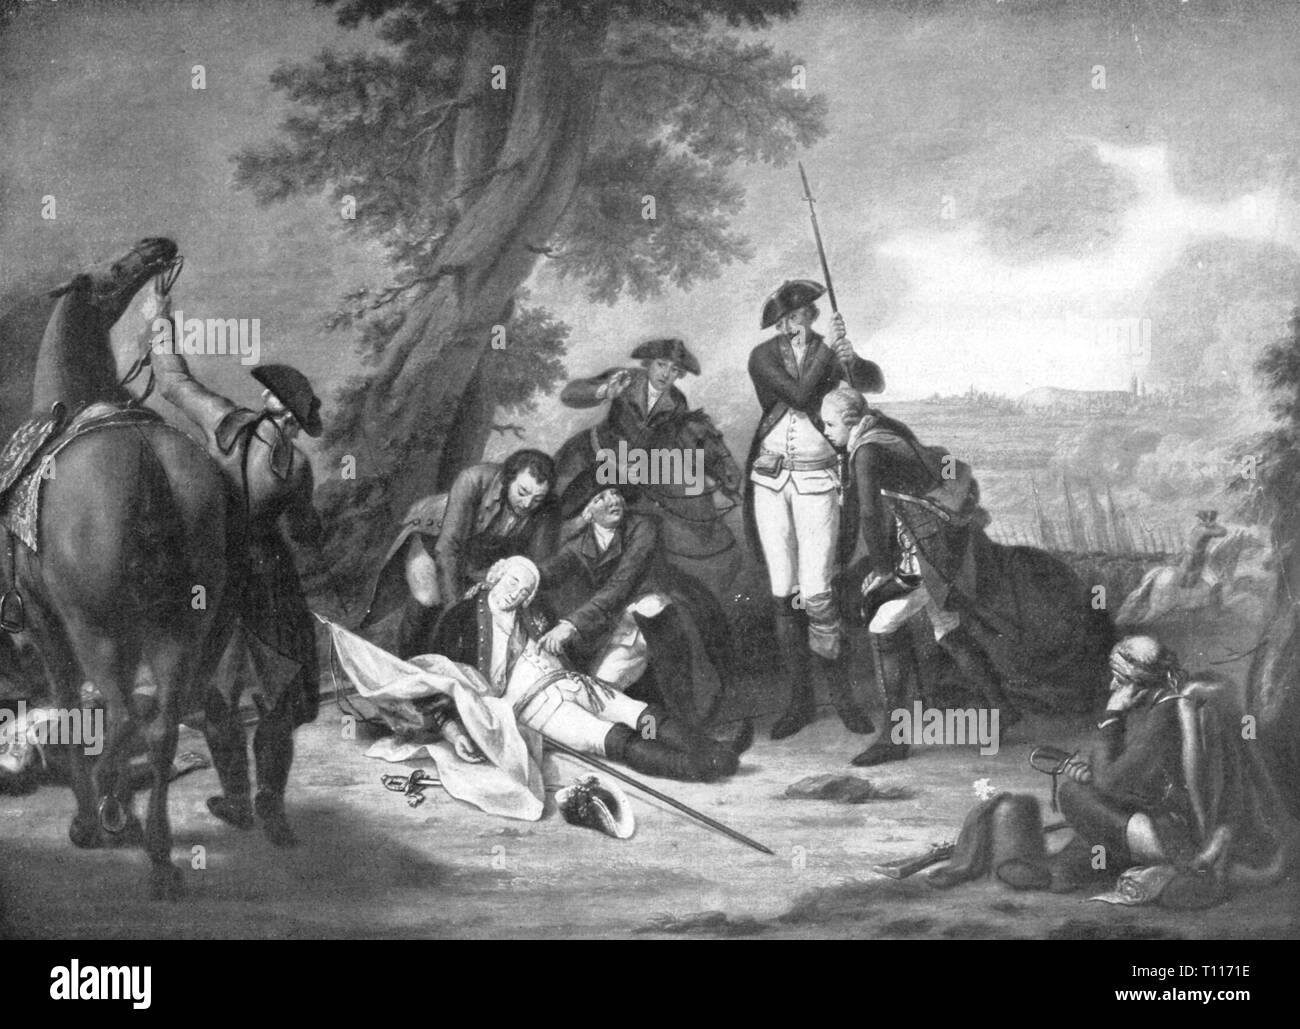 Seven Years War 1756 - 1763, European theatre of war, Bohemia, Battle of Prague, 6.5.1757, death of the Prussian field marshal Kurt Christoph count of Schwerin, print based on painting by Johann Christoph fresh, late 18th century, Third Silesian War, nobility, aristocracy, military, army, armies, officer, officers, Prussian Field Marshal General, people, men, man, group, groups, Kingdom of Prussia, casualties, fallen, wars, theatre of war, theatres of war, battle, battles, Prague, Praha, print, printings, historic, historical, Artist's Copyright has not to be cleared Stock Photo